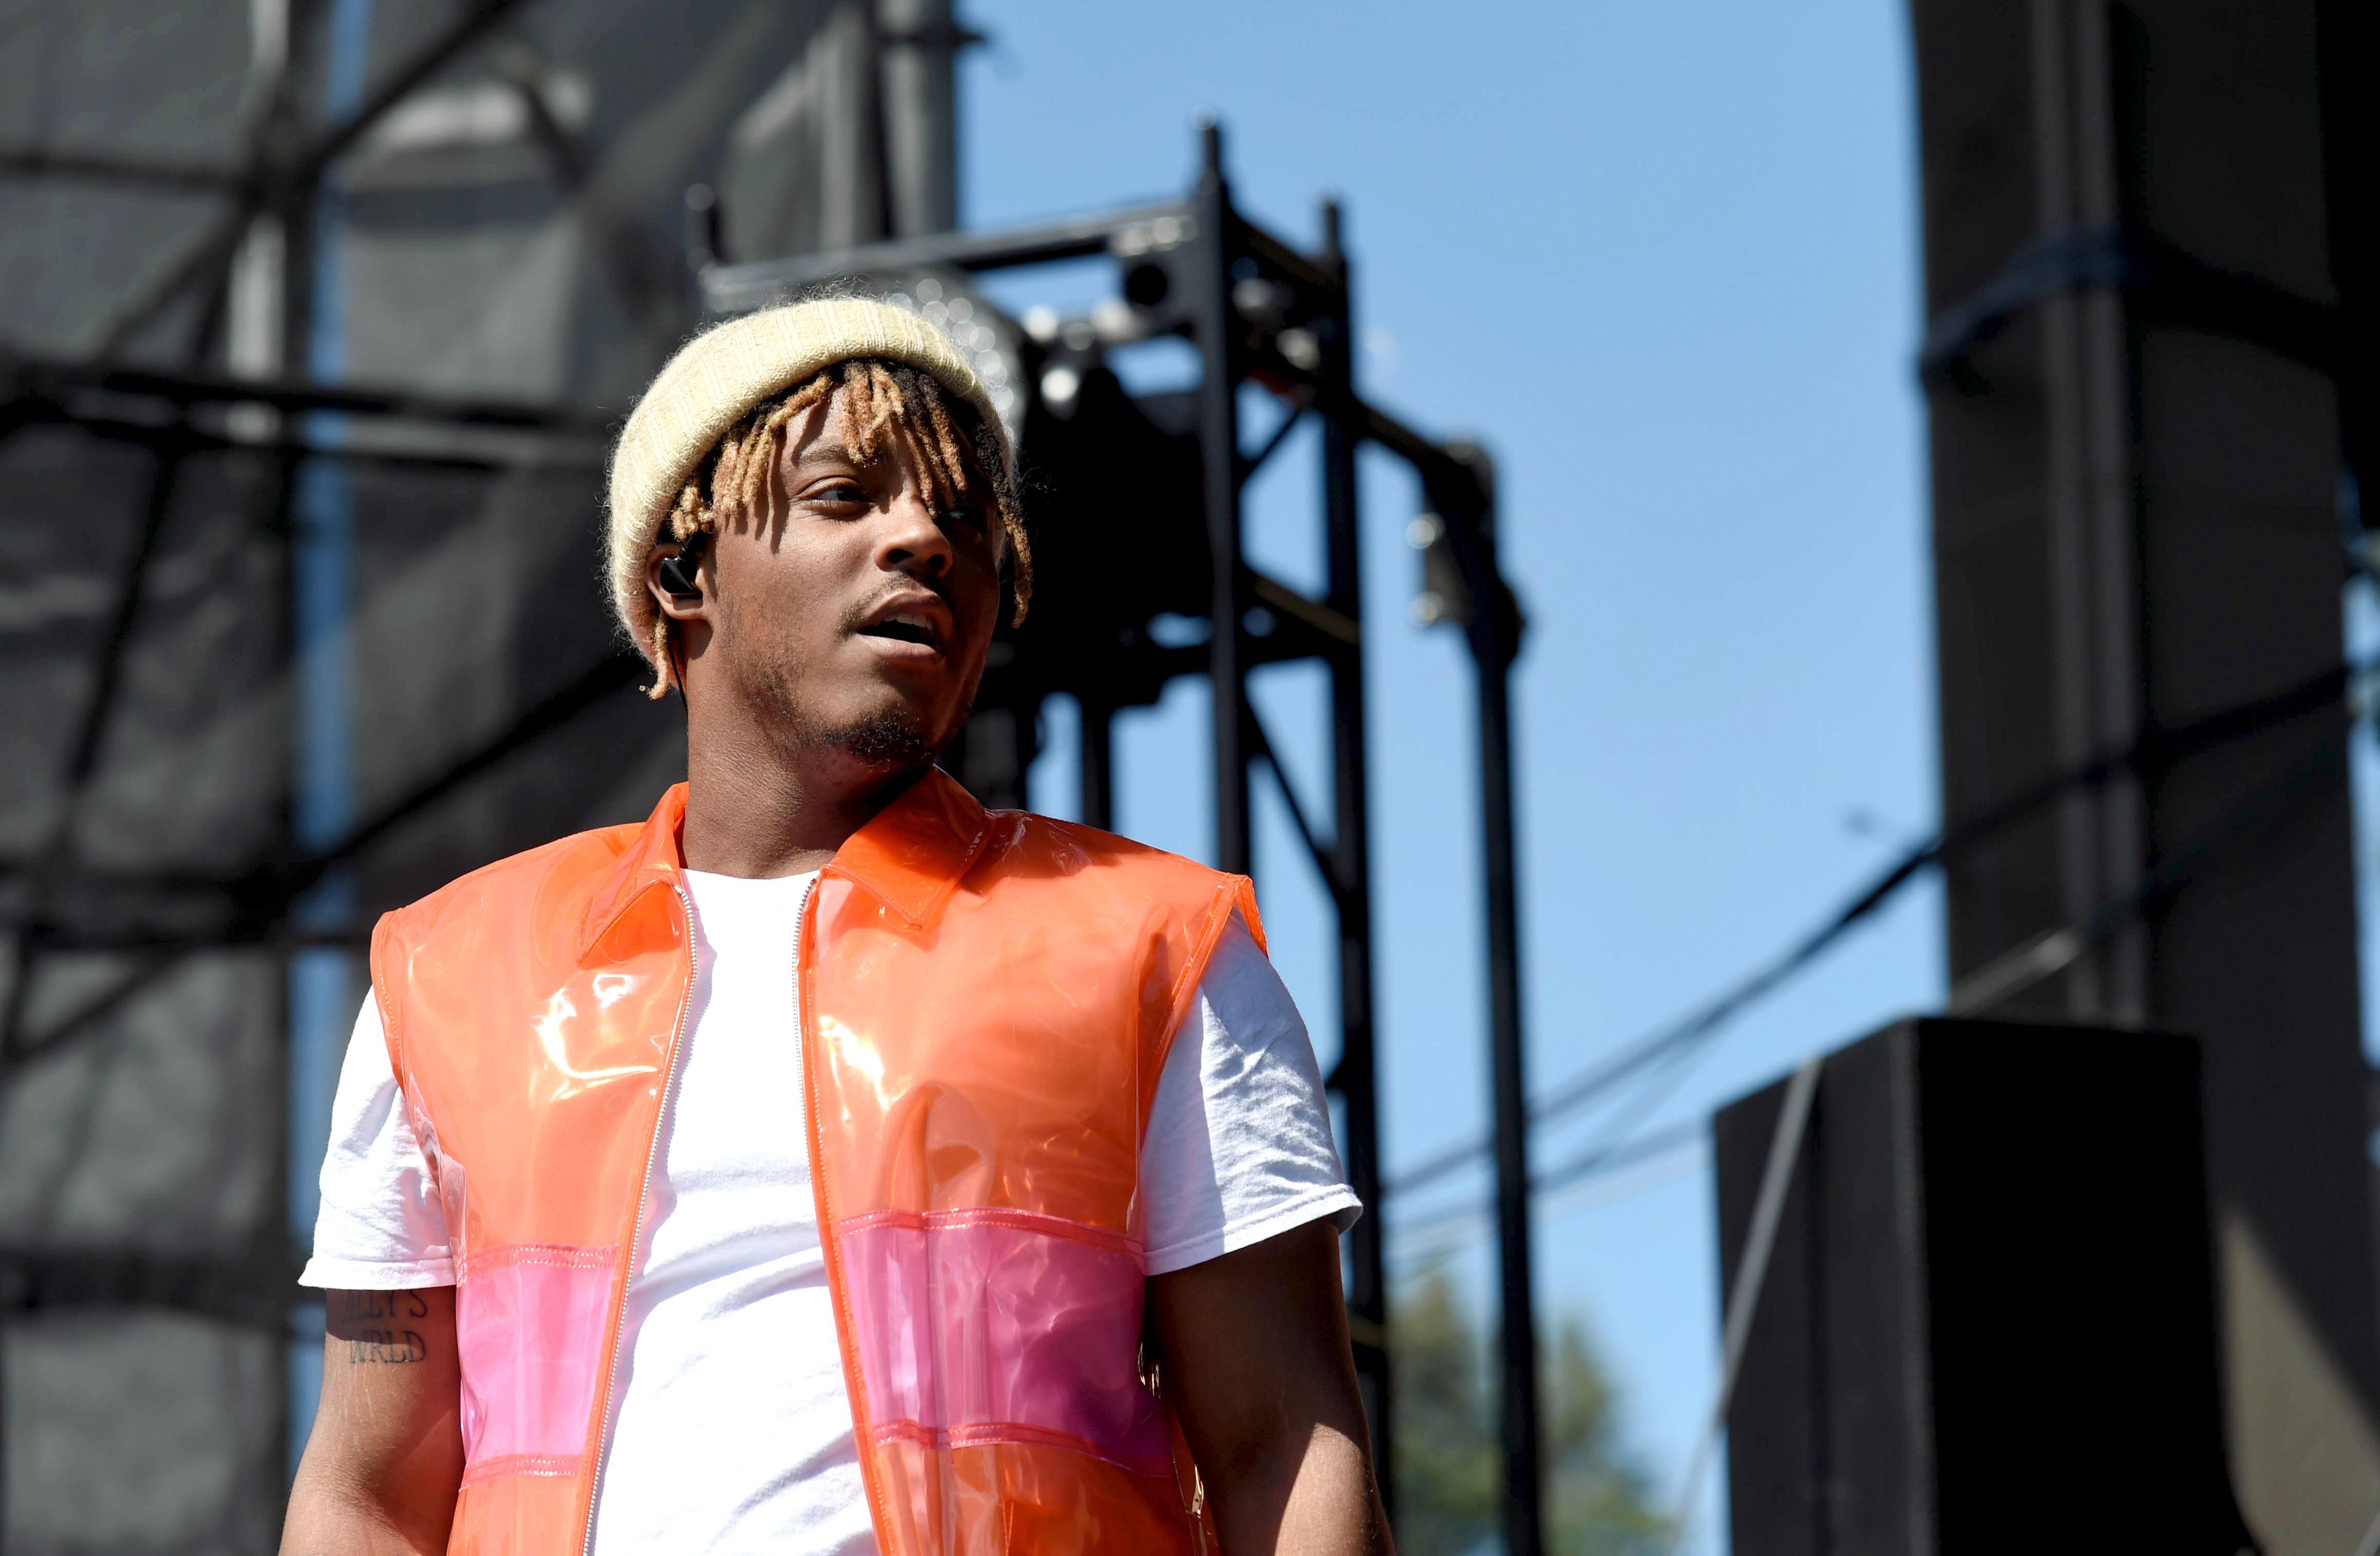 Report: Police say rapper Juice Wrld swallowed Percocet before suffering  seizure at Chicago airport and dying